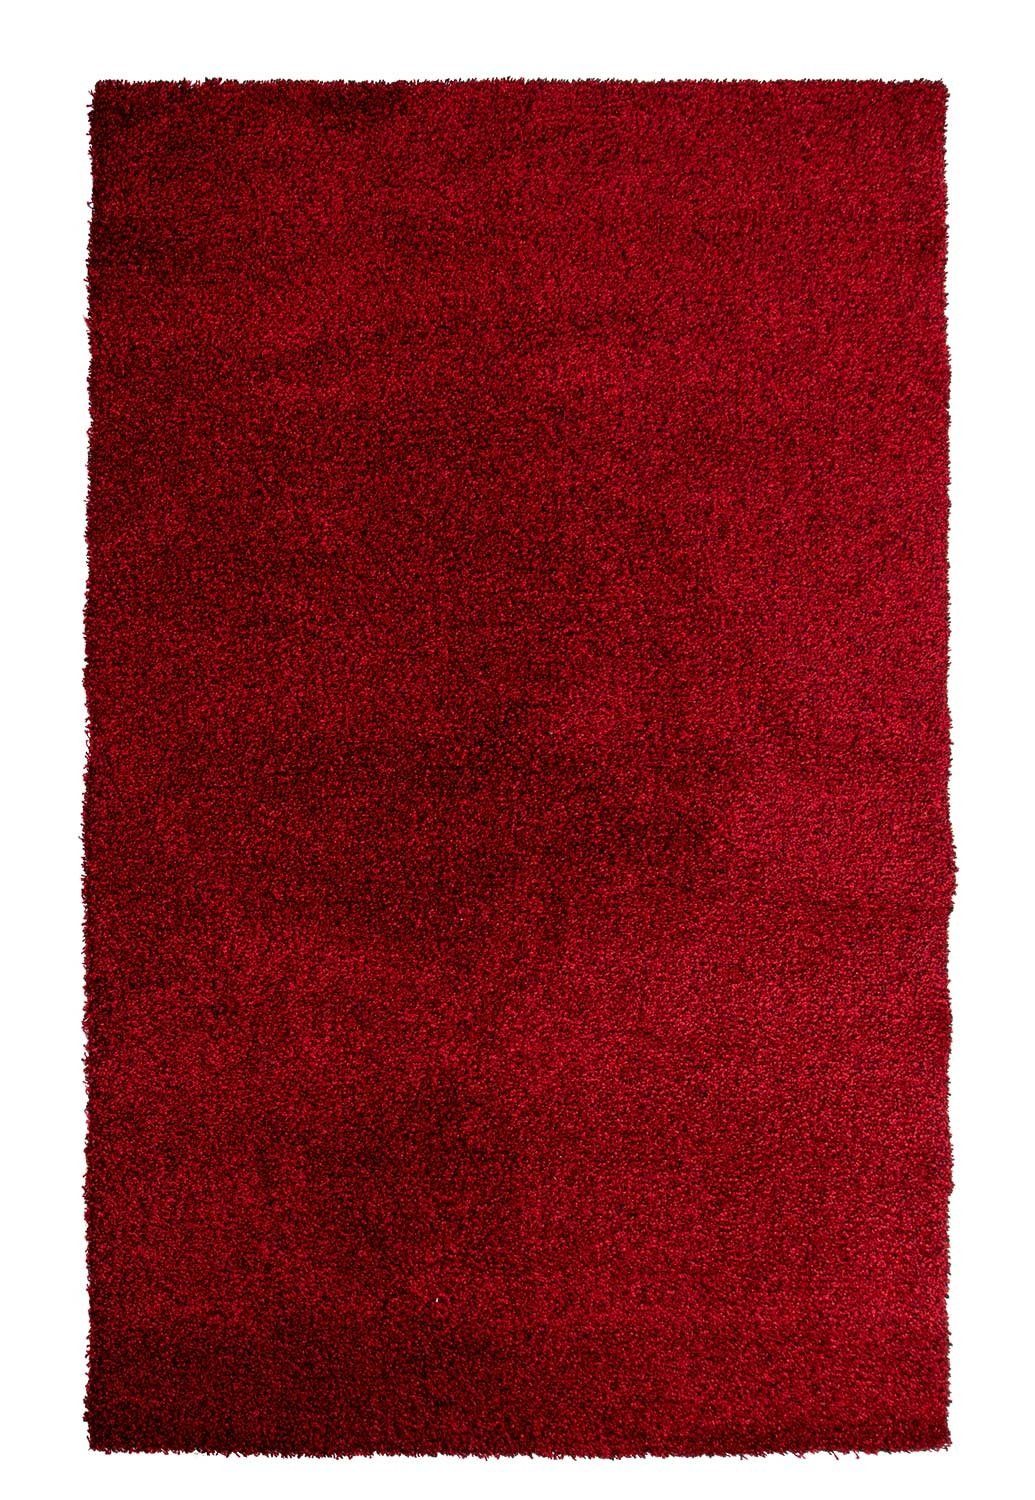 cm, COSY, 22 Rot, DELIGHT 230 x rechteckig, Rugs, 160 mm Höhe: Teppich Polyester, Balta